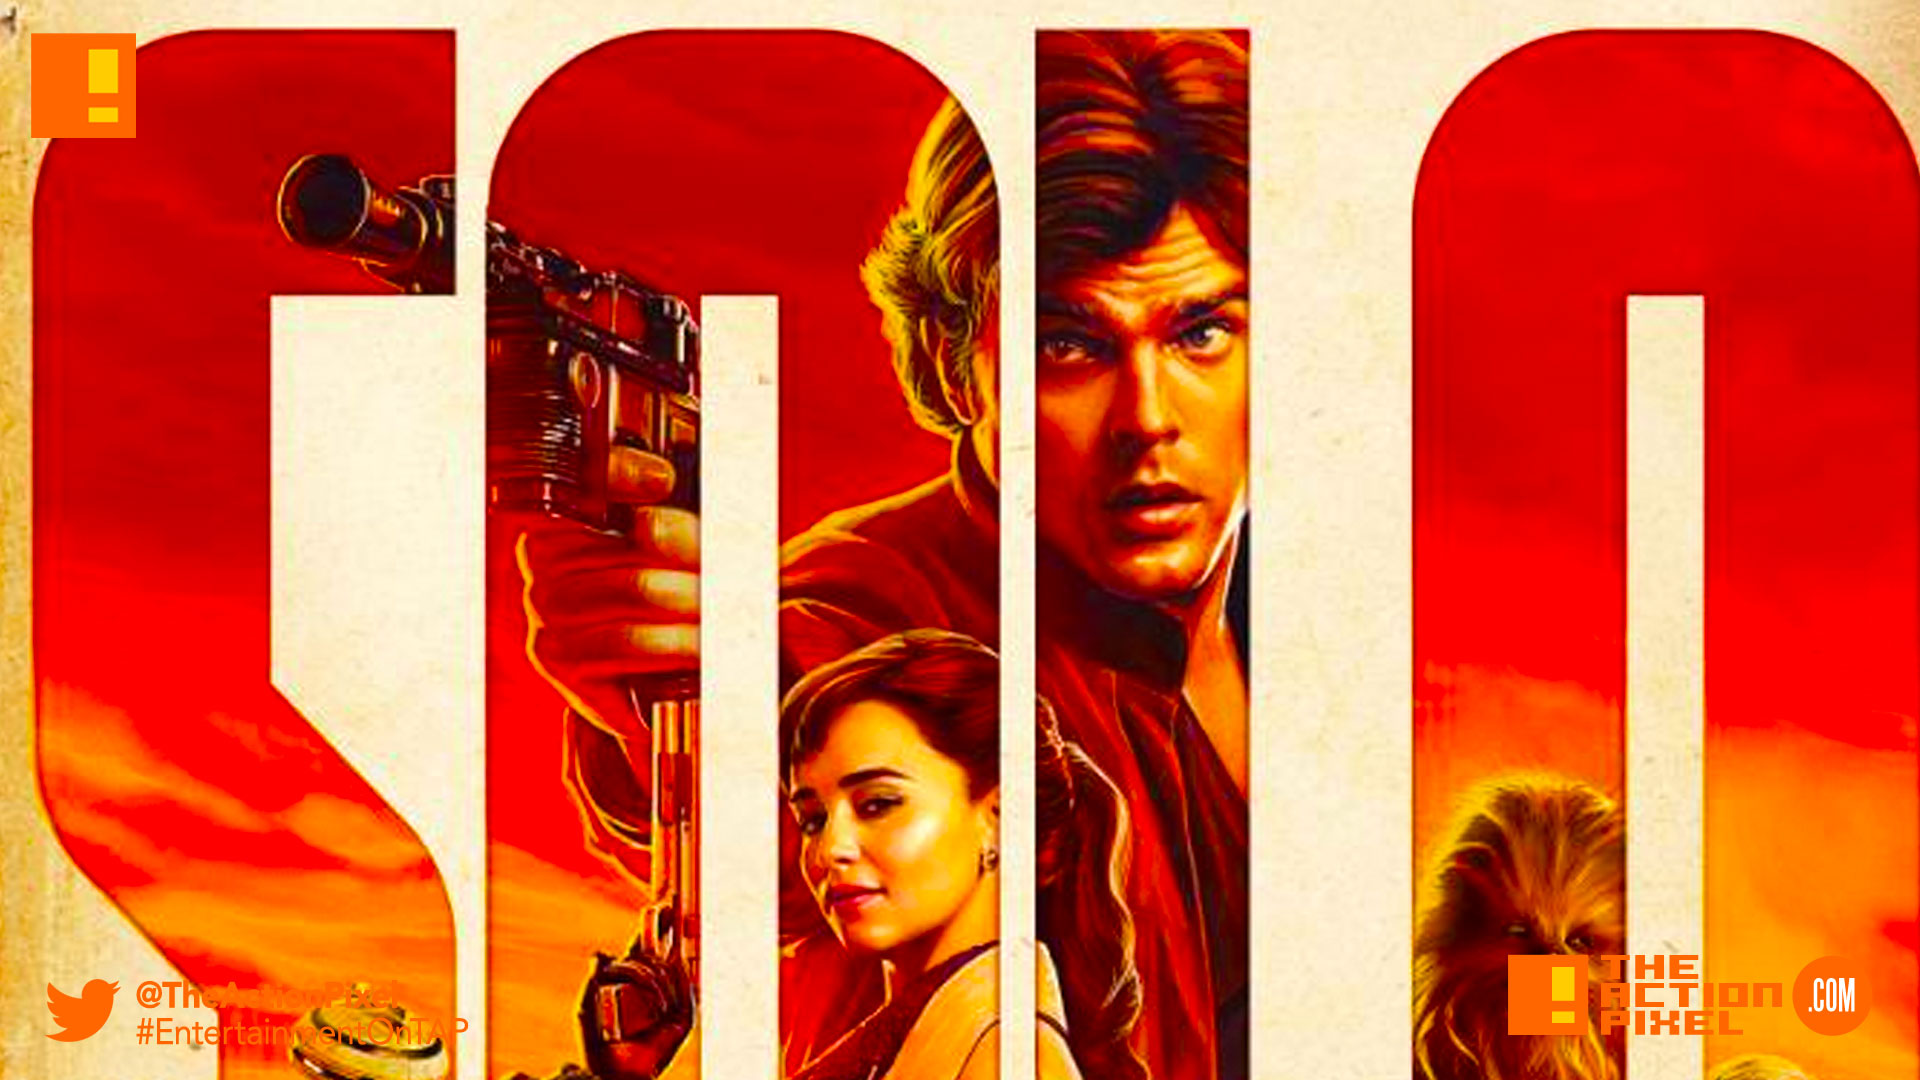 poster, poster art, ron howard, han solo, a star wars story, alden ehrenreich, han solo, the action pixel, star wars, solo movie, han solo solo movie, a star wars story, entertainment on tap, donald glover,woody harrelson,big game, tv spot,chewie, qi'ra, solo,